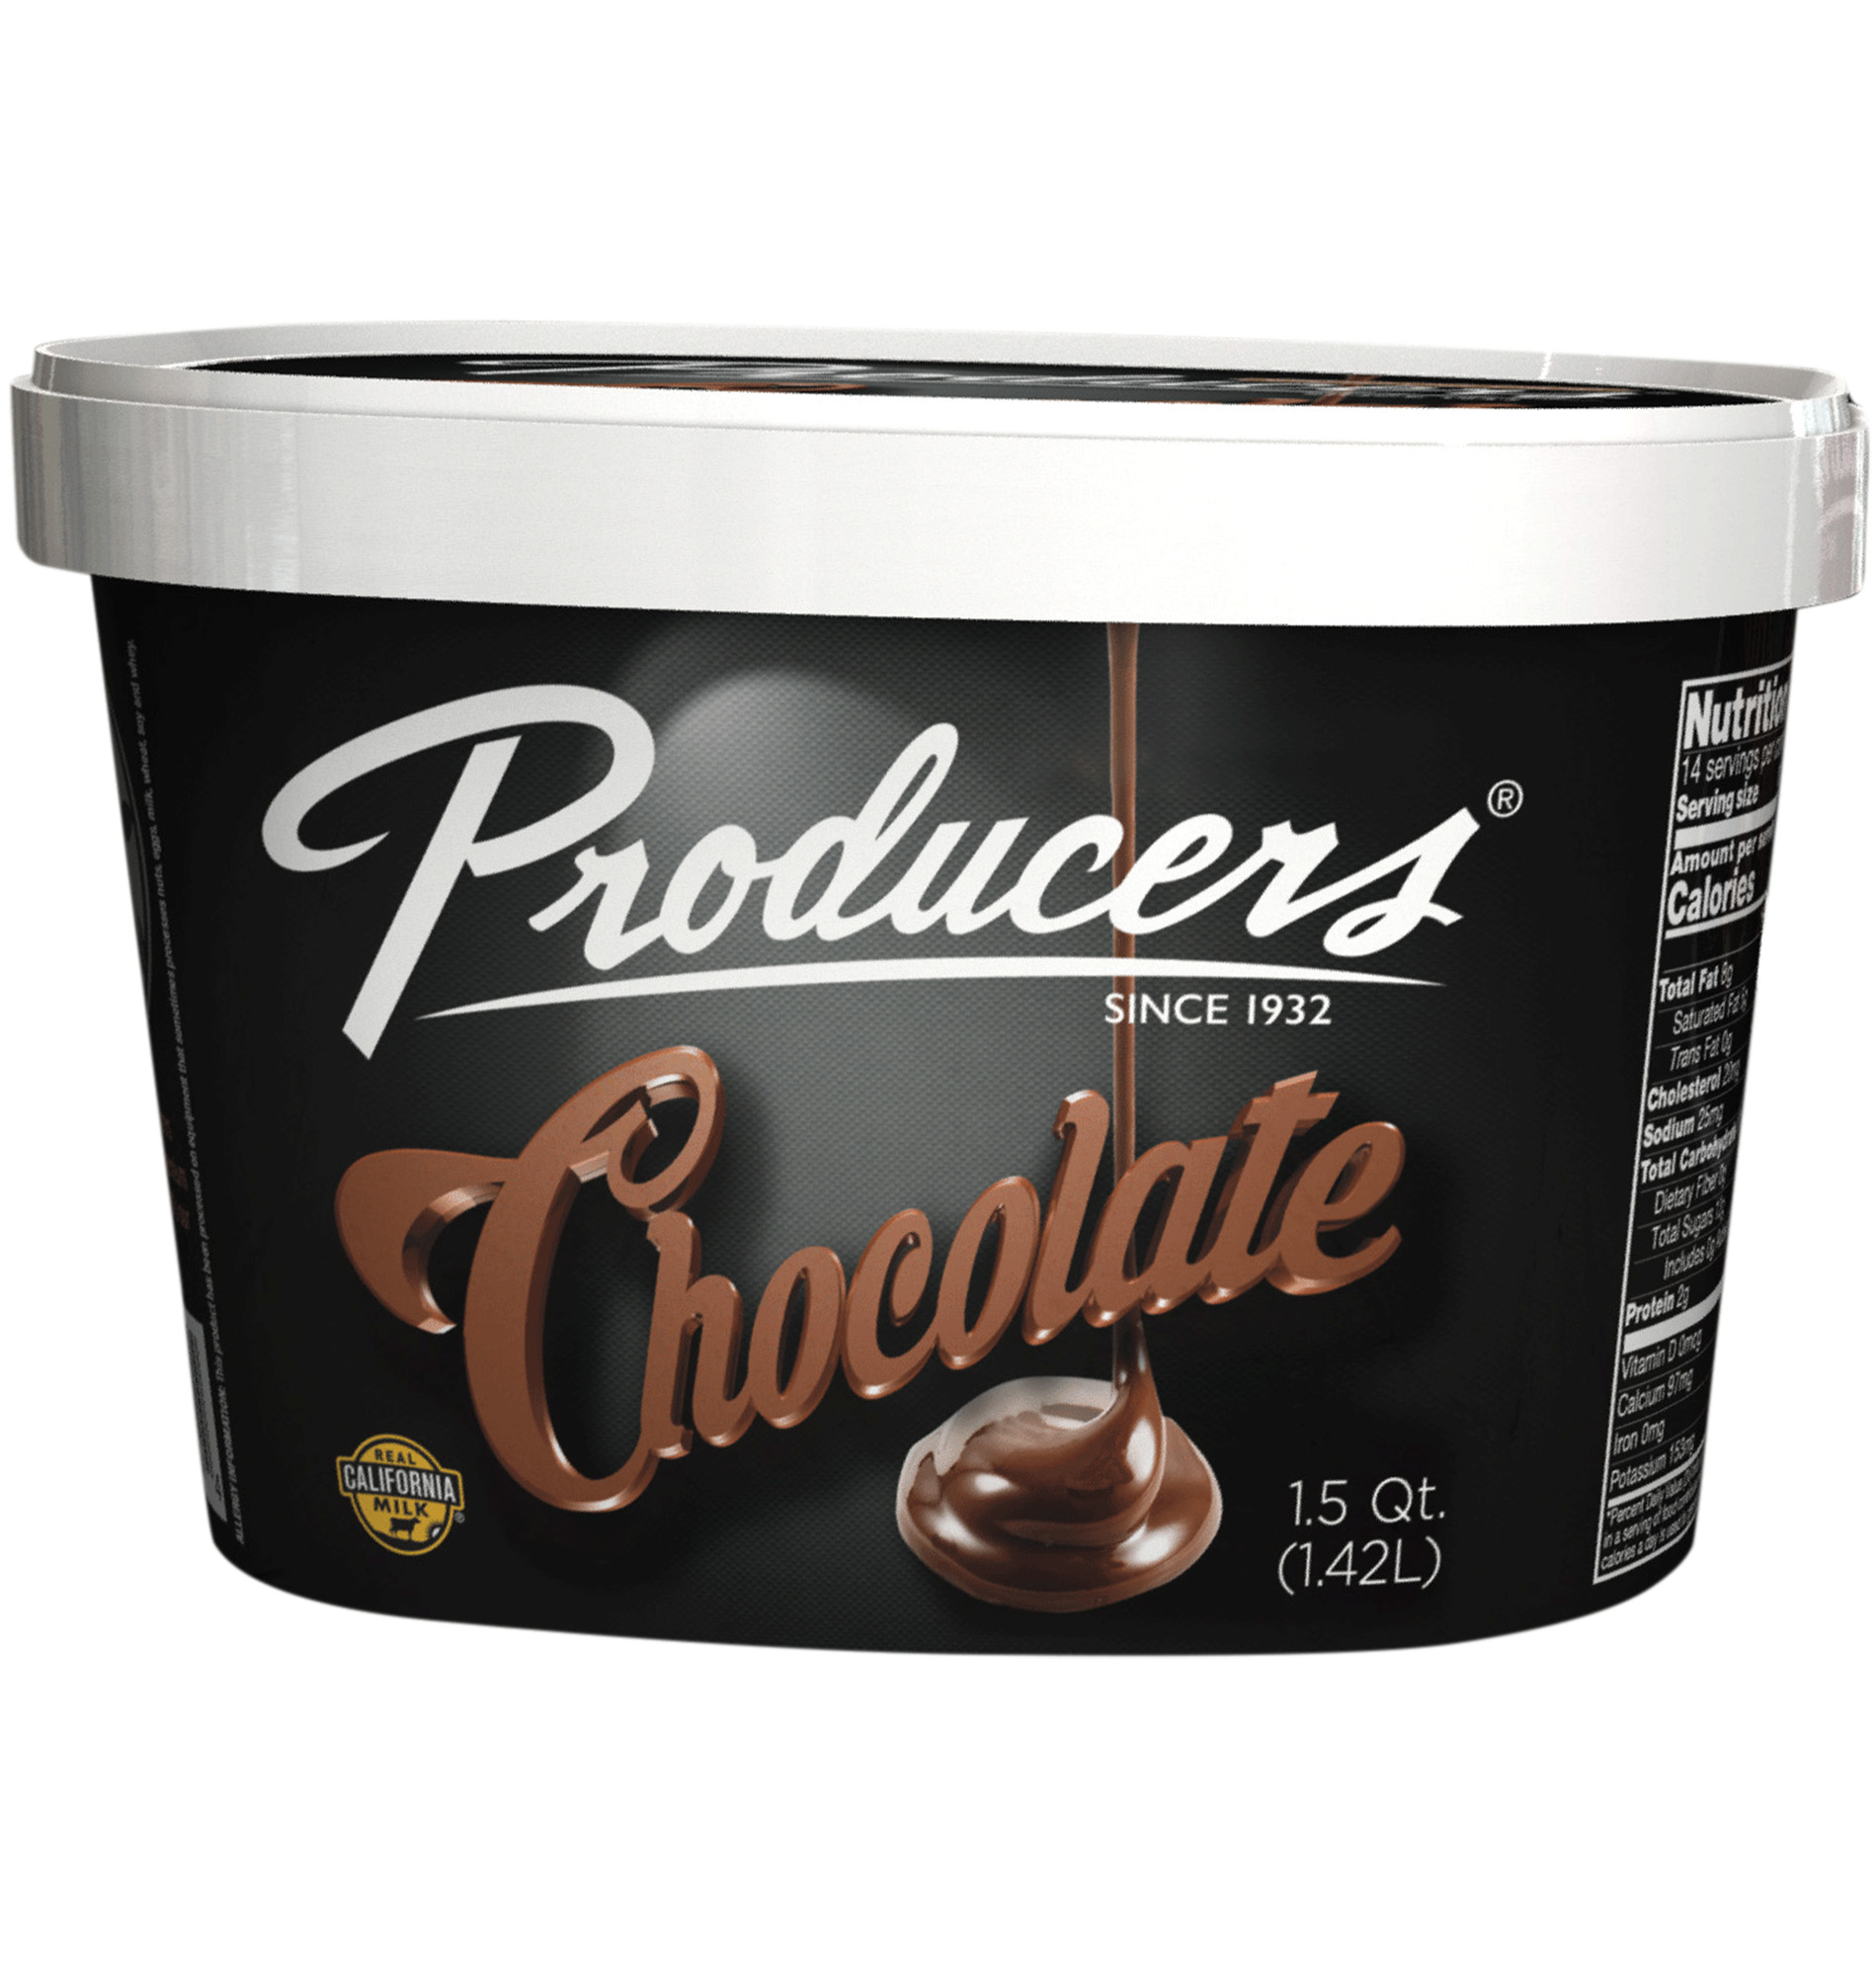 Chocolate Producers Ice Cream Container